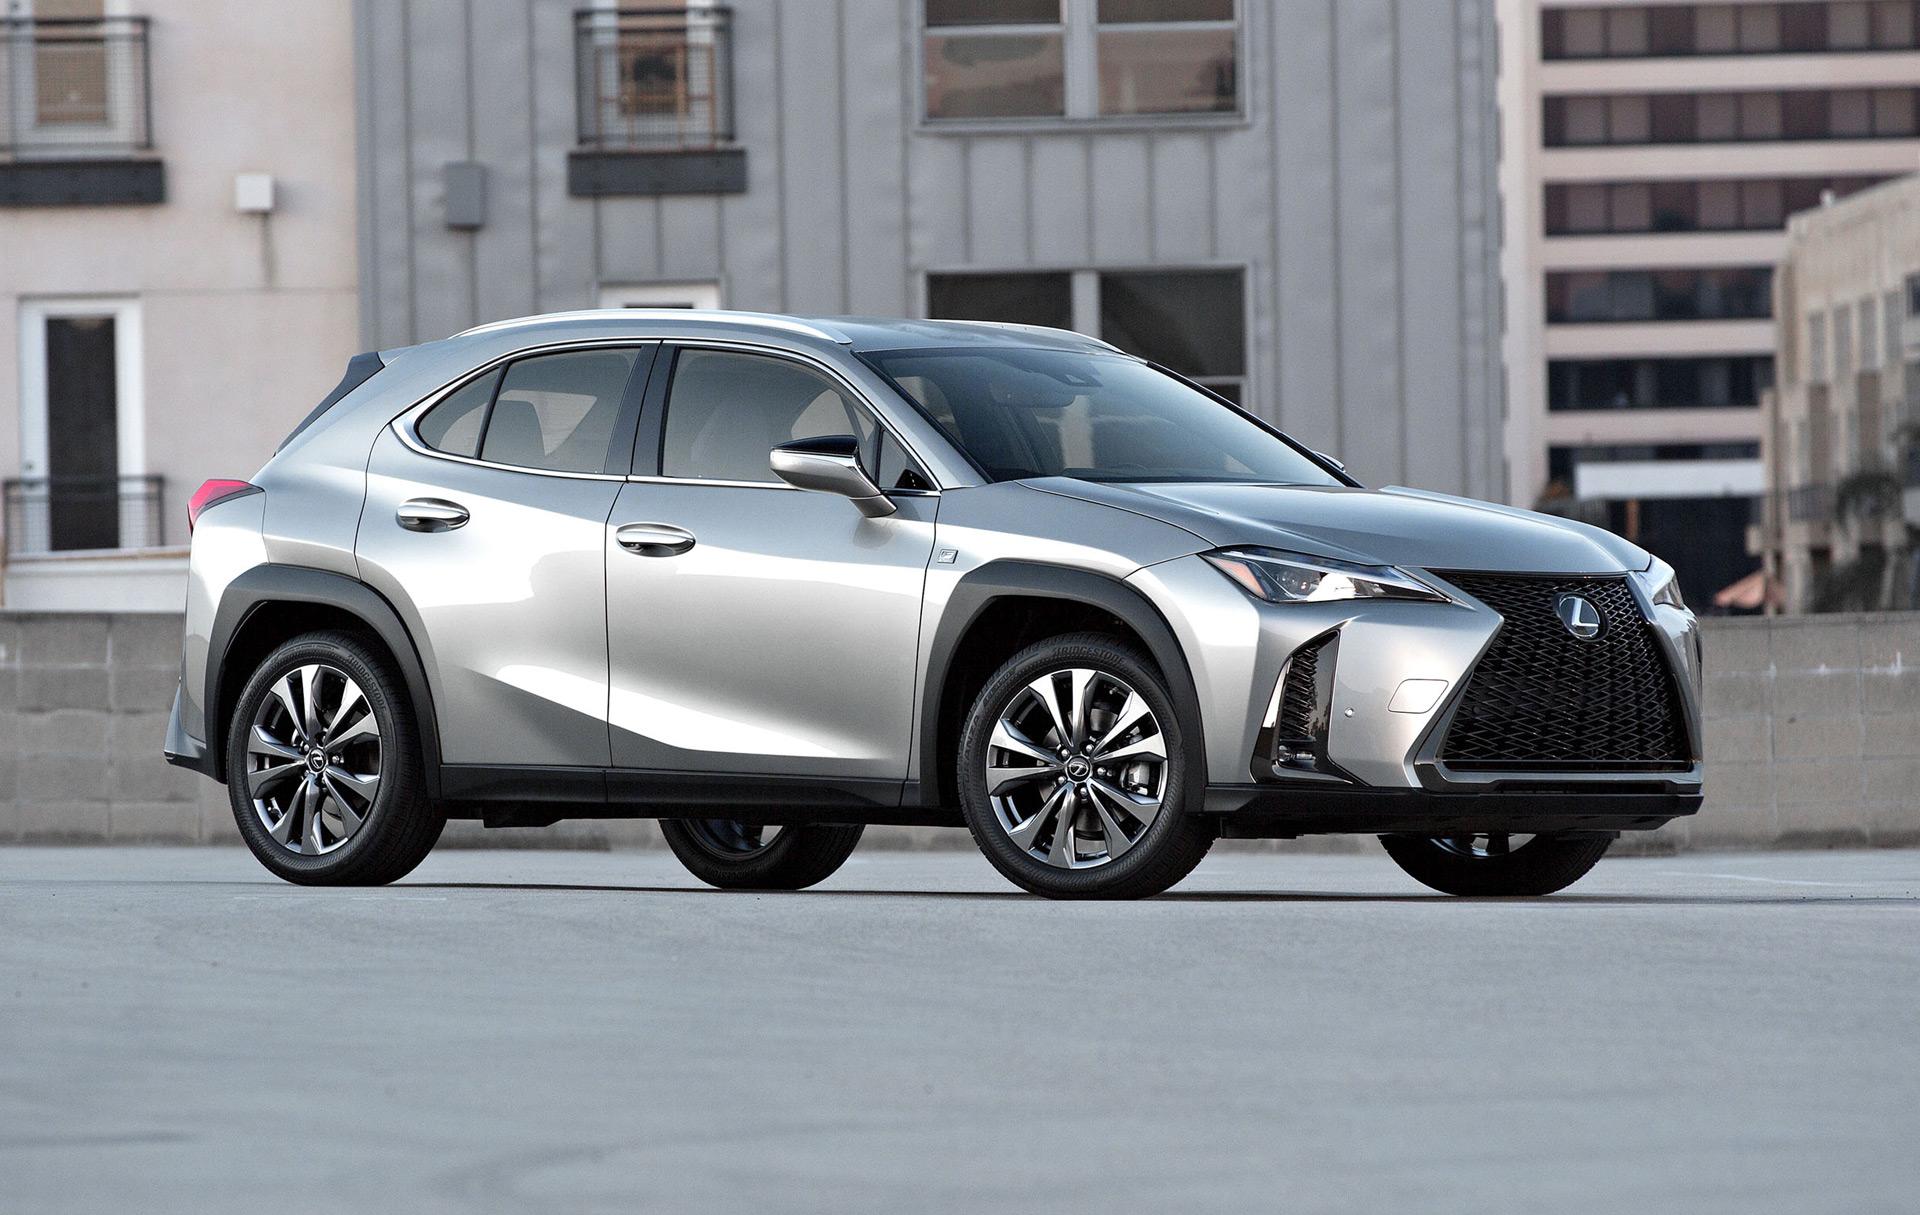 UX to be first Lexus available via subscription